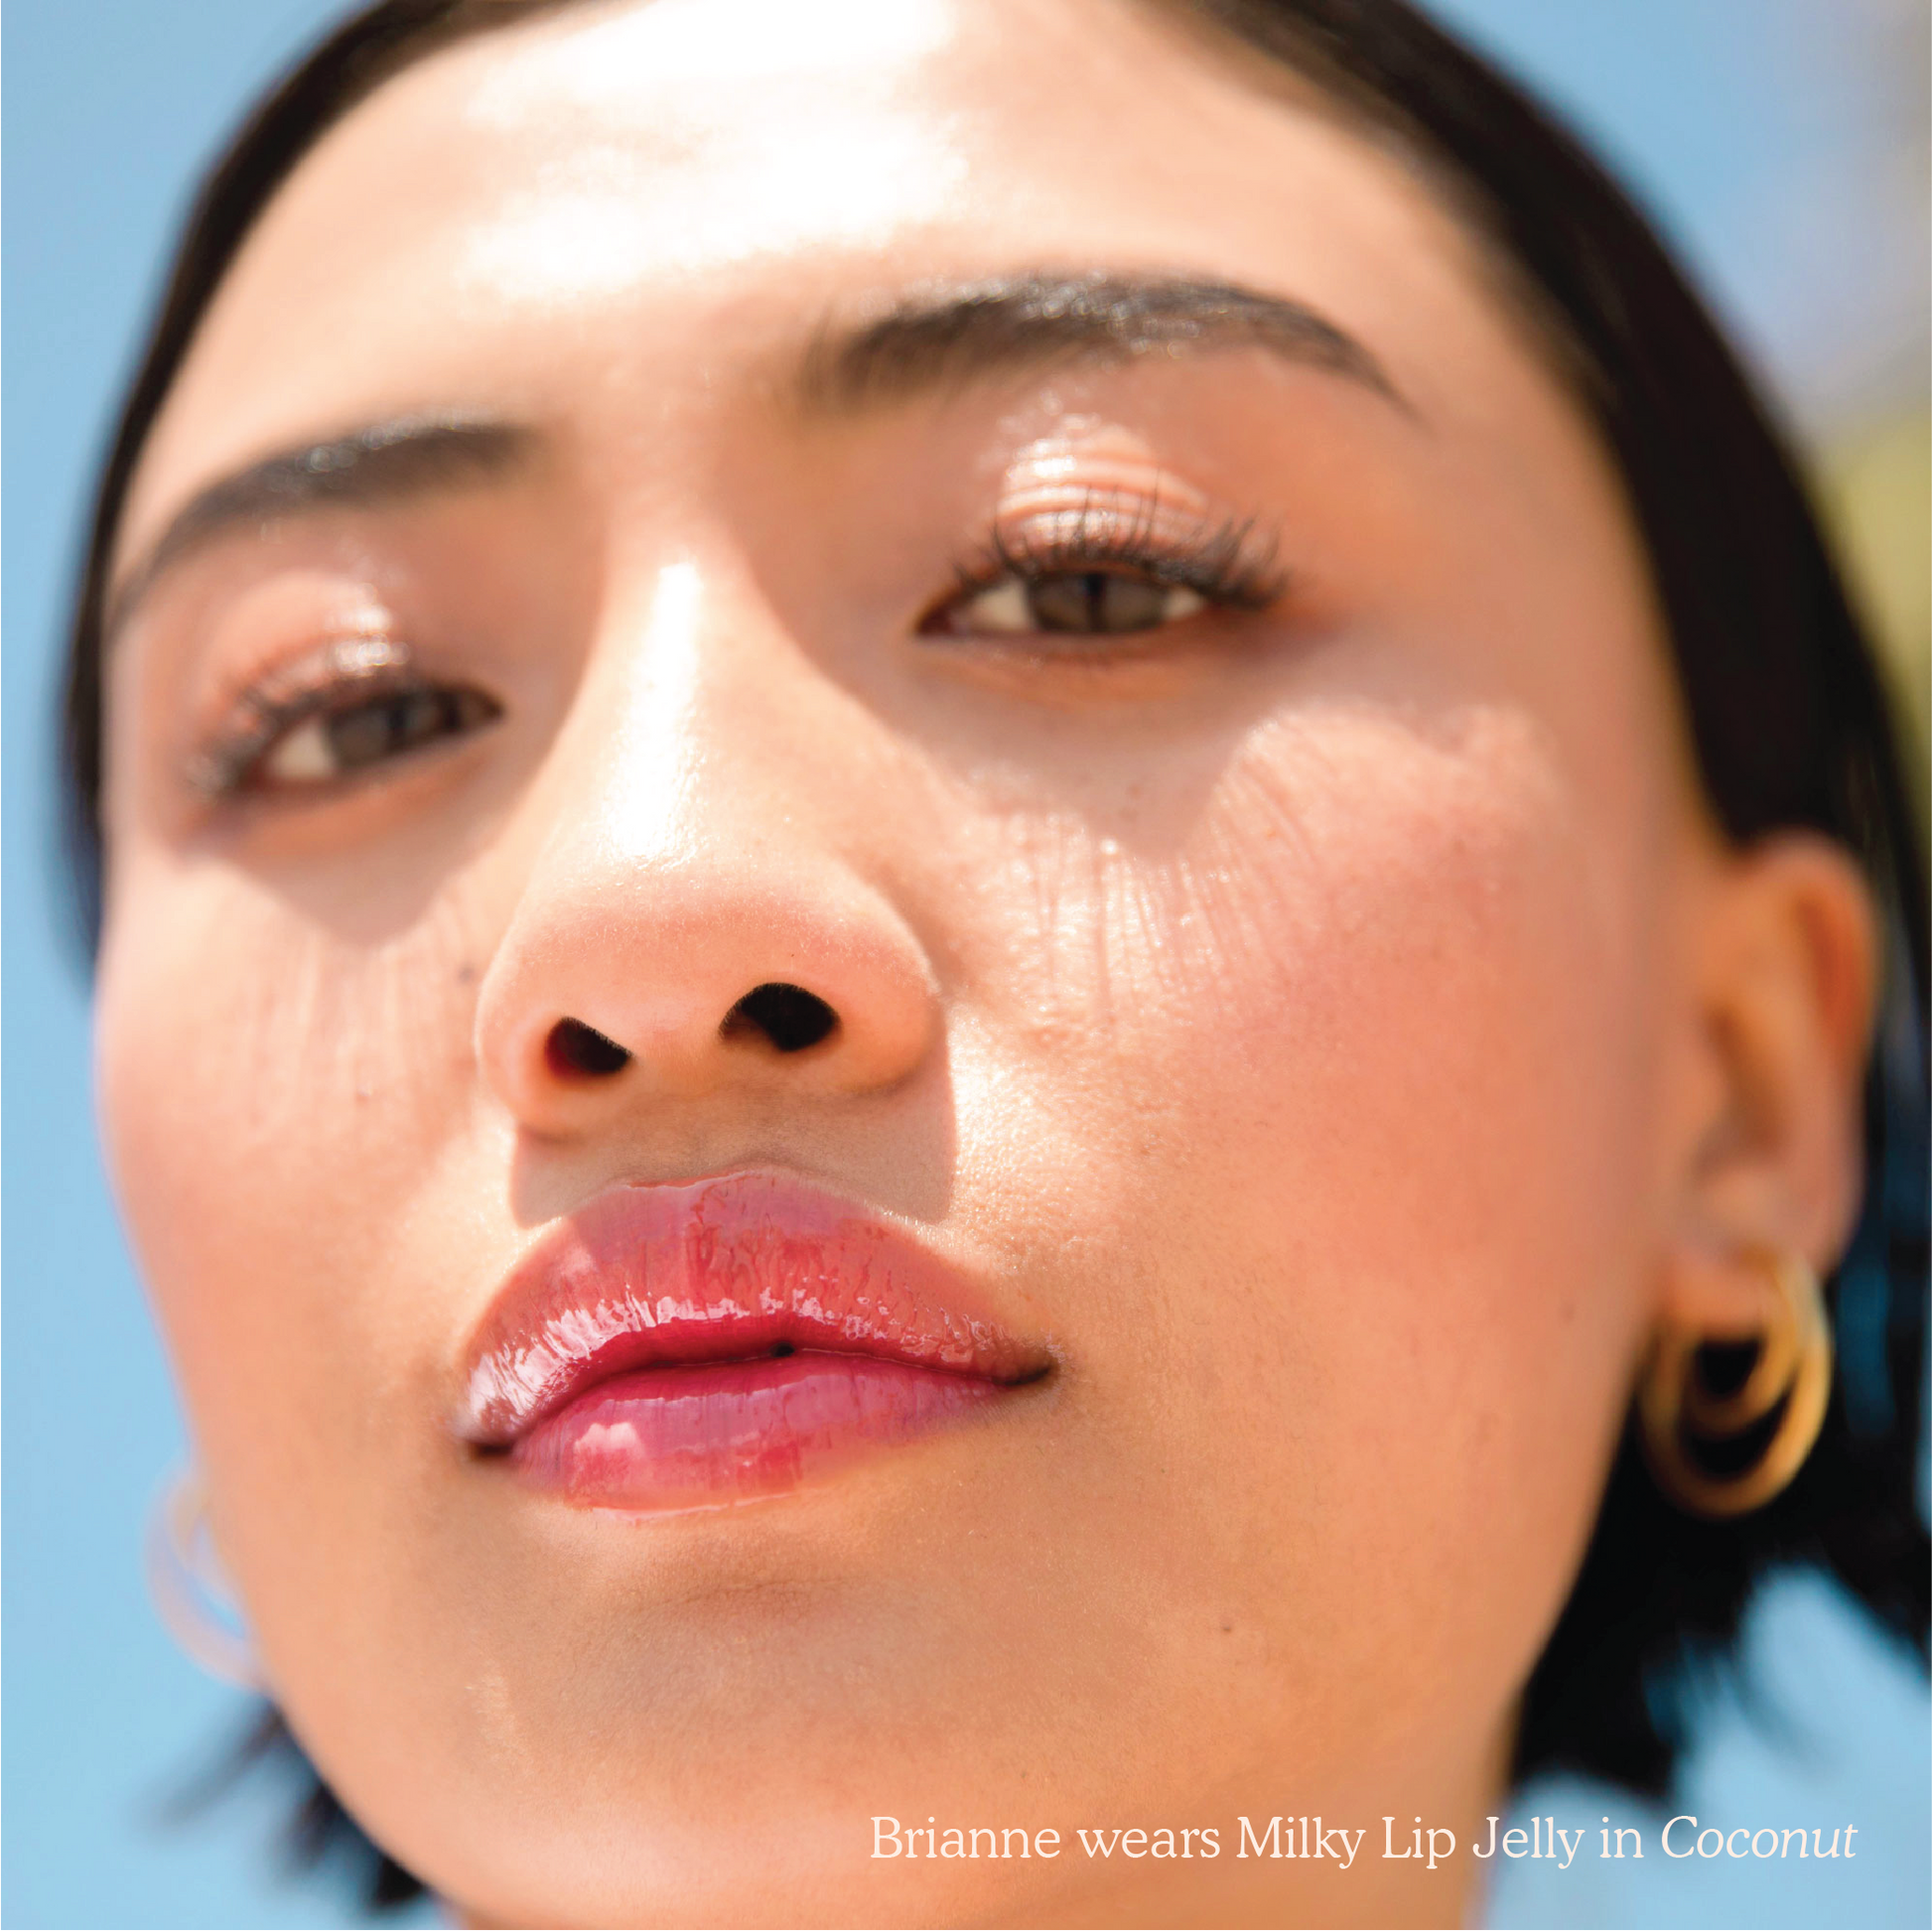 [Shared - Closeup photo of a girl with very glossy lips, wearing the Tower 28 Beauty ShineOn Milky Lip Jelly shade in Coconut (a milky mauve-pink)